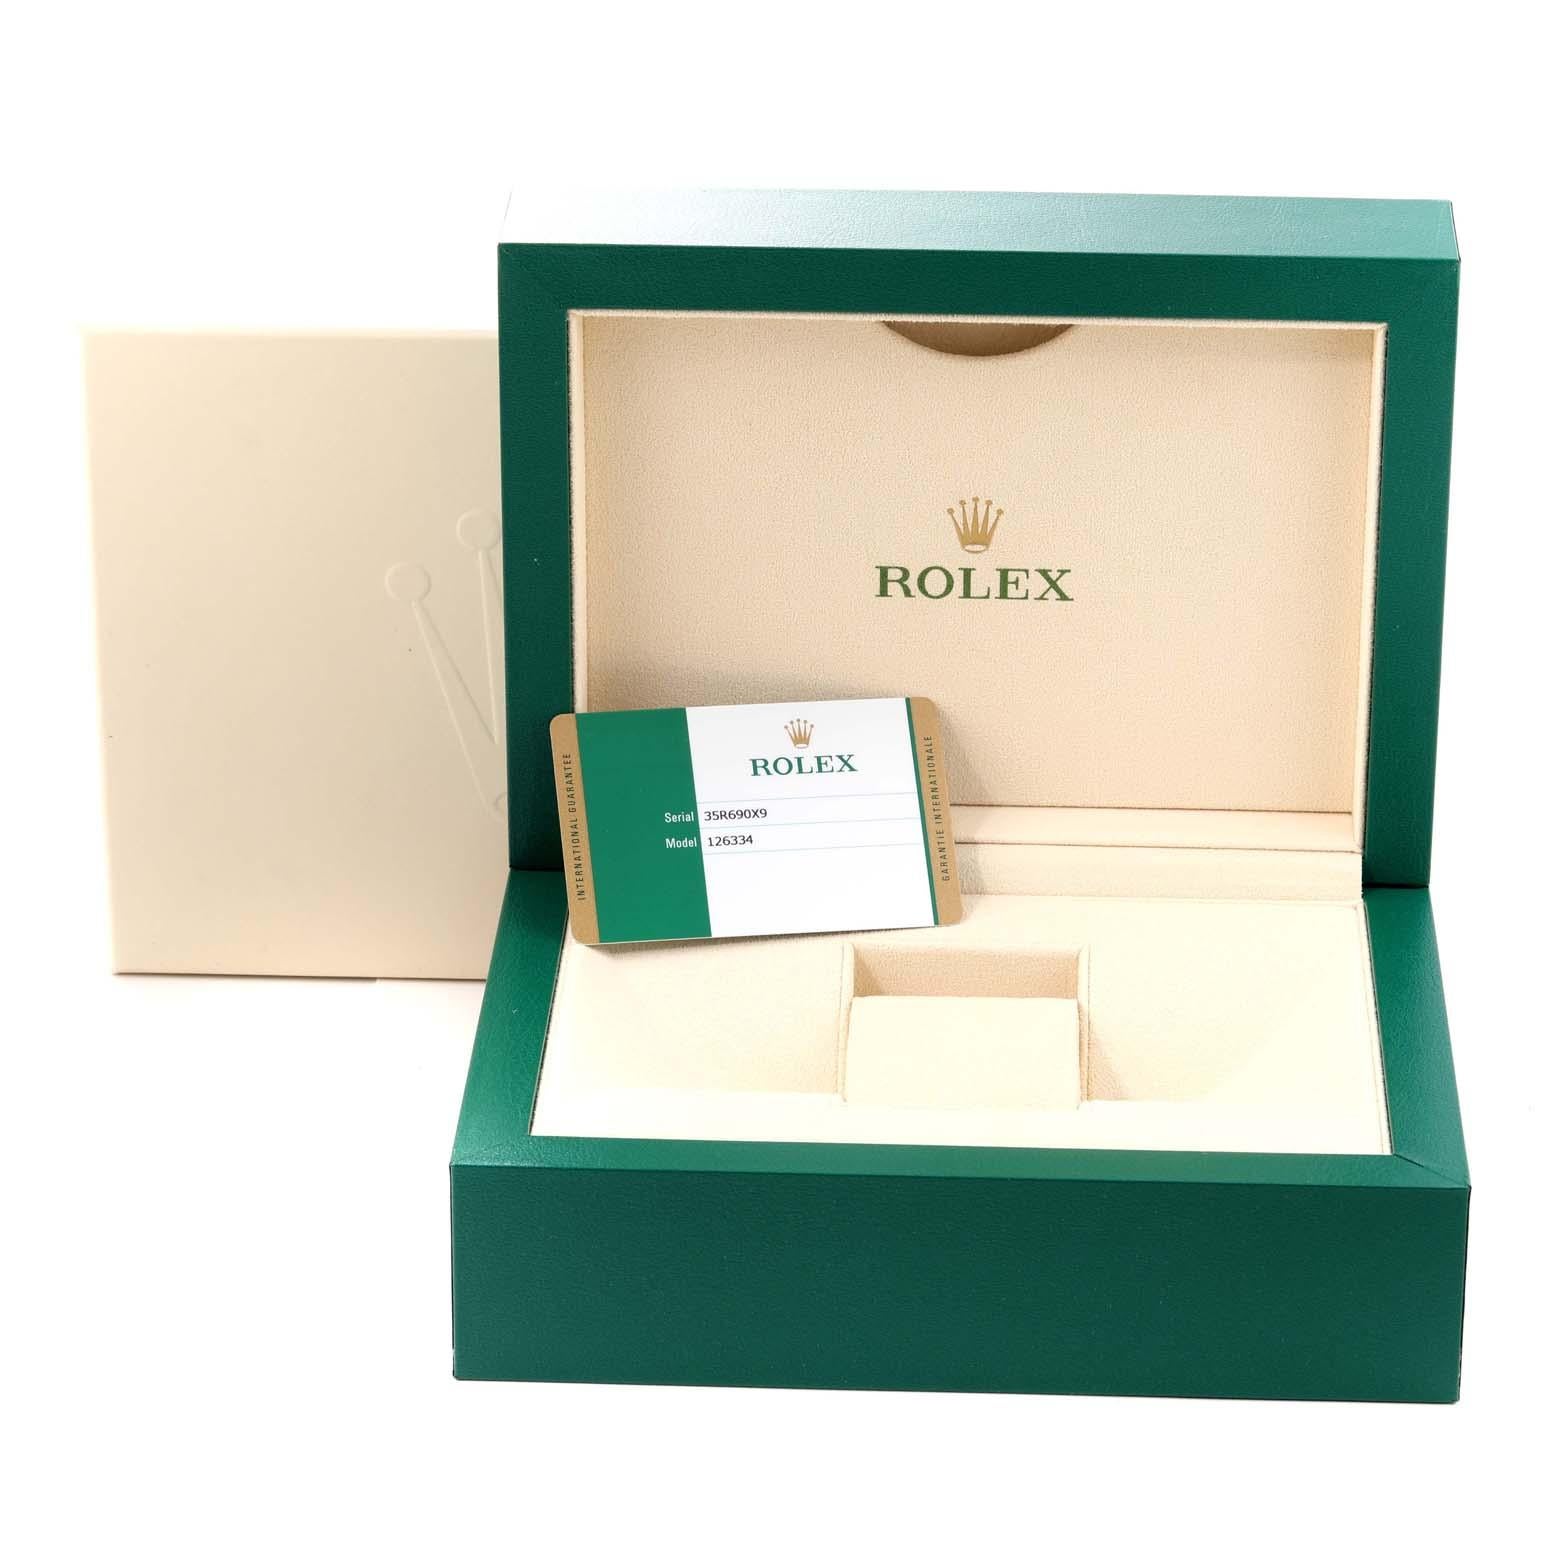 Rolex Datejust 41 Steel White Gold Silver Dial Mens Watch 126334 Box Card 8